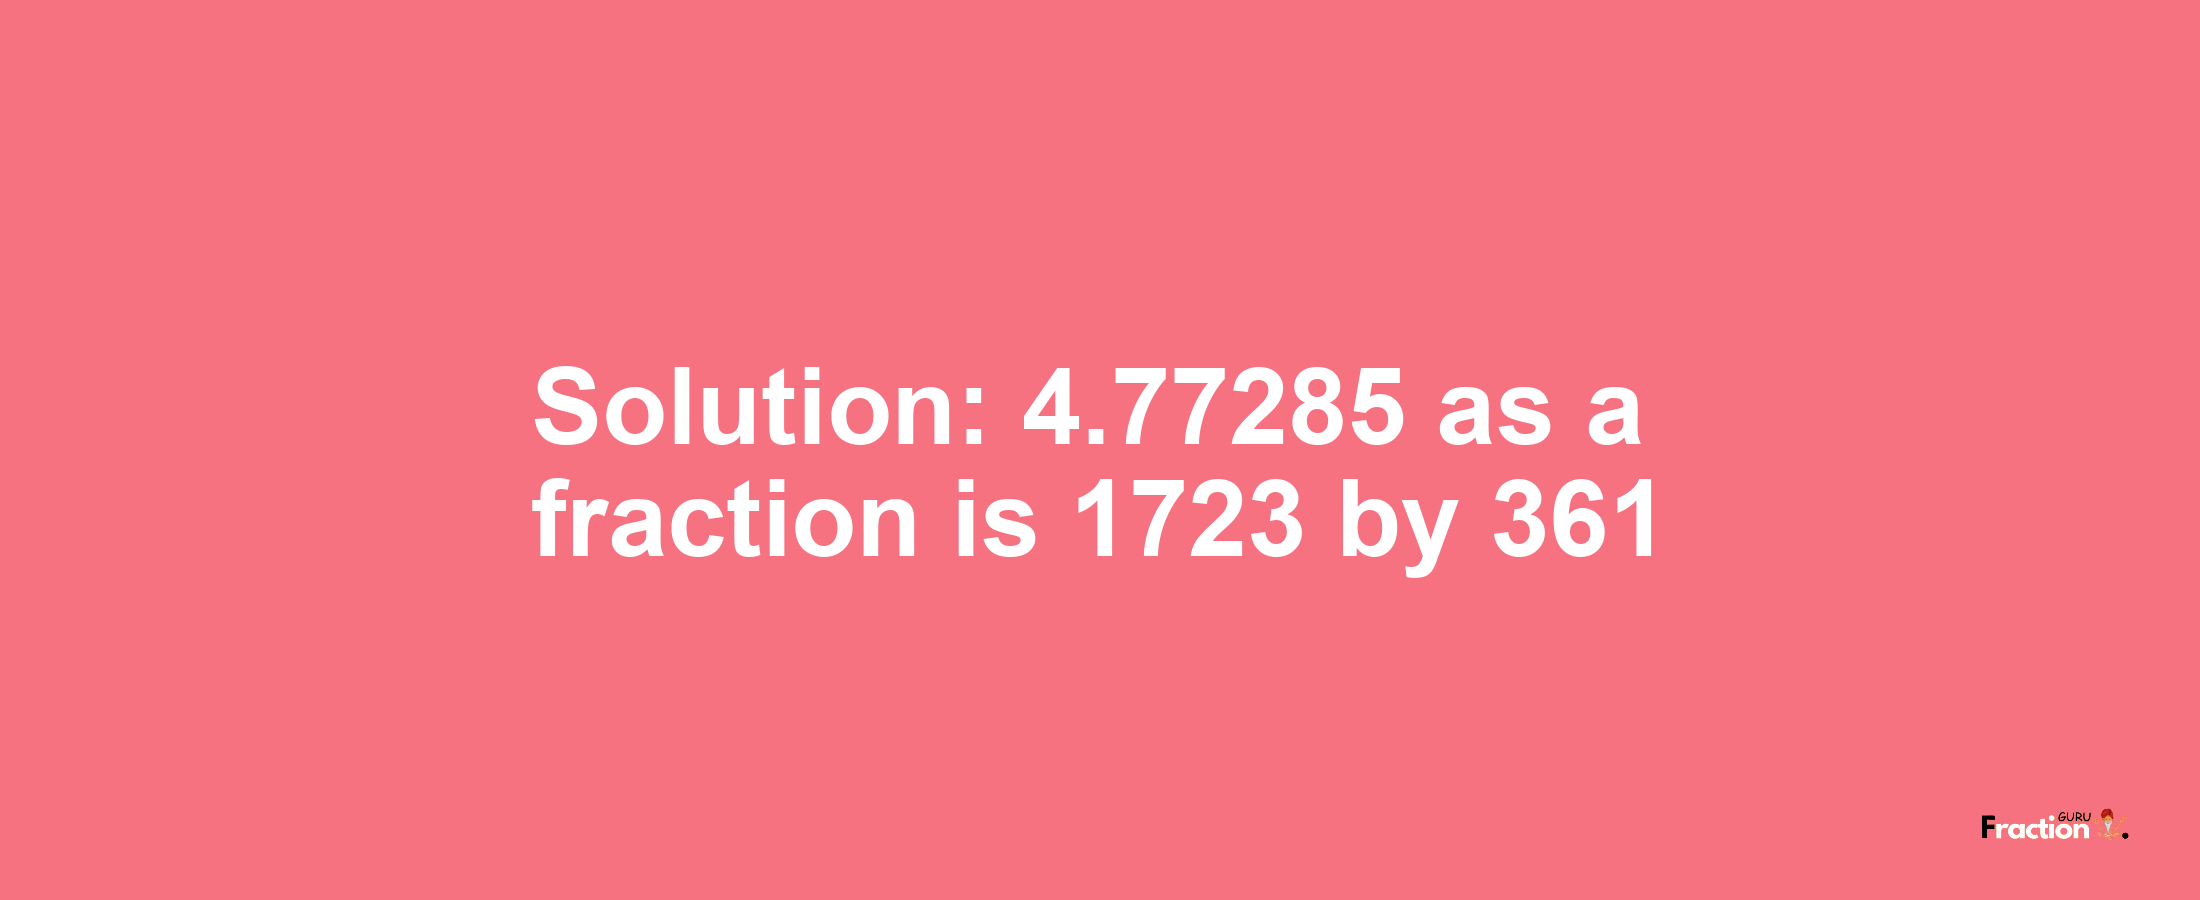 Solution:4.77285 as a fraction is 1723/361